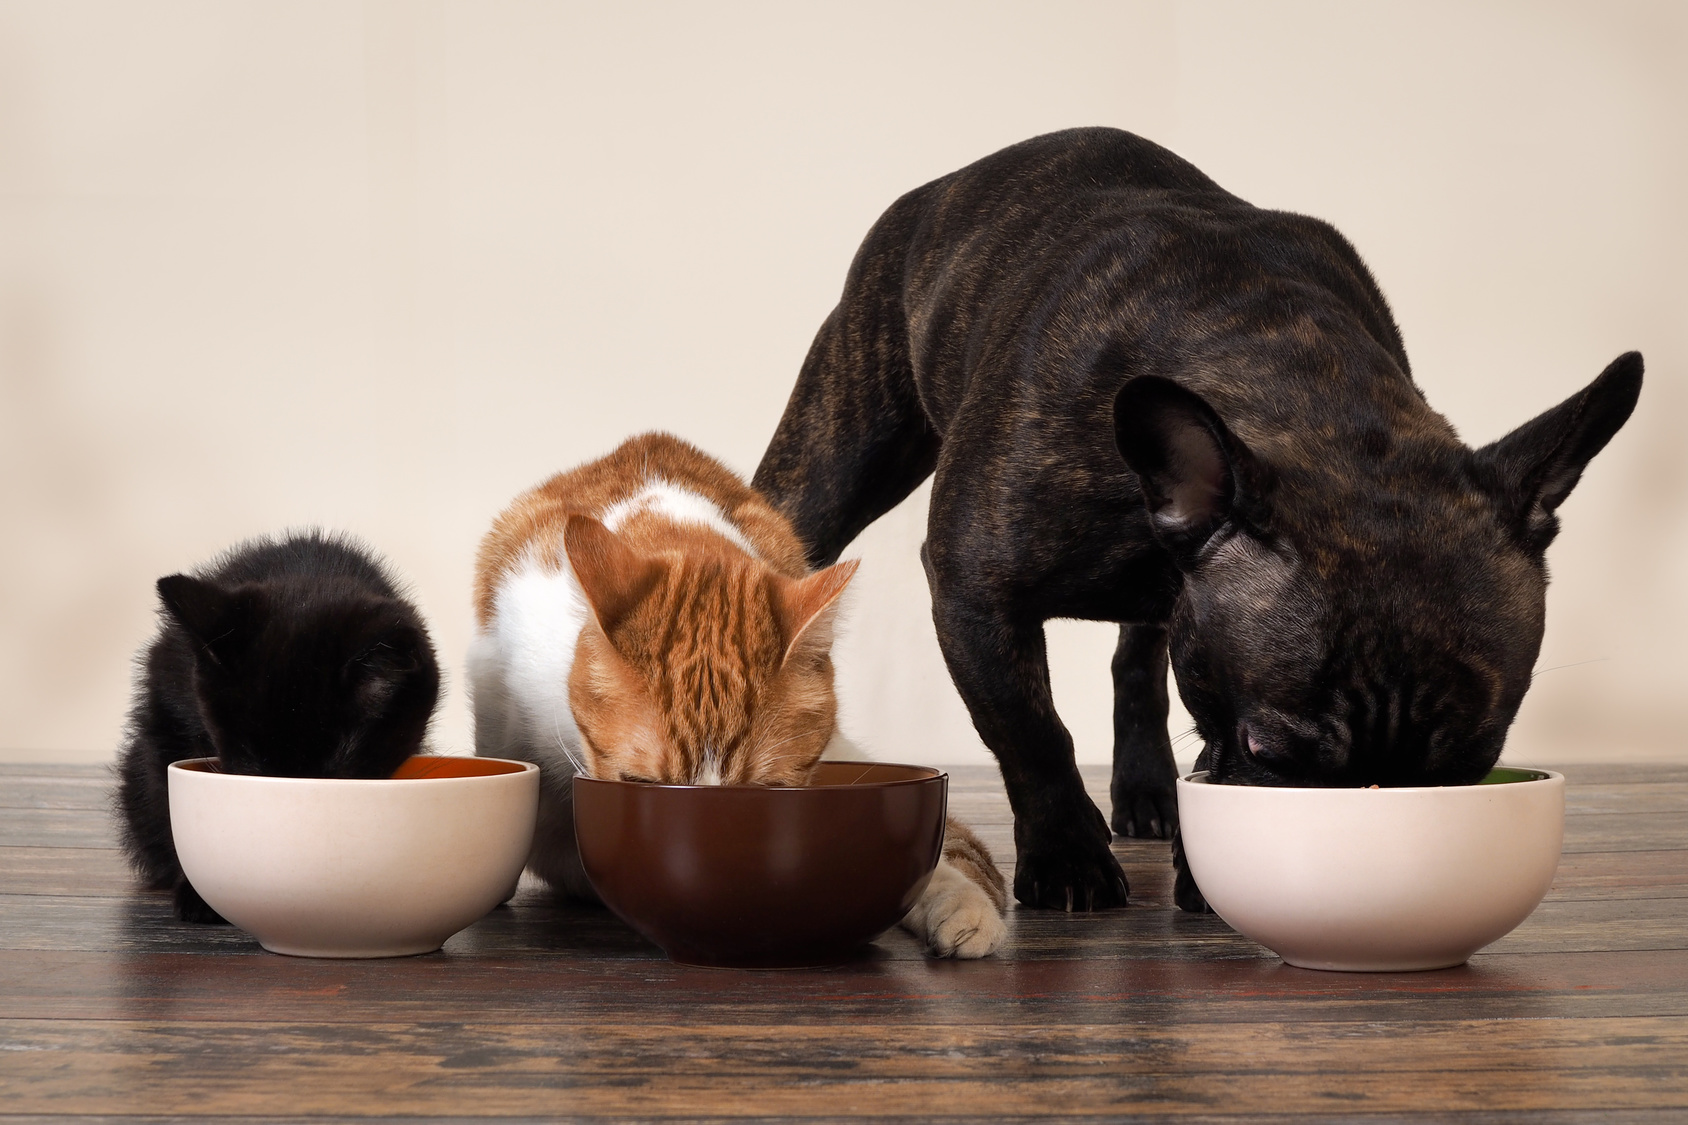 Cats and a dog eating pet food from bowls